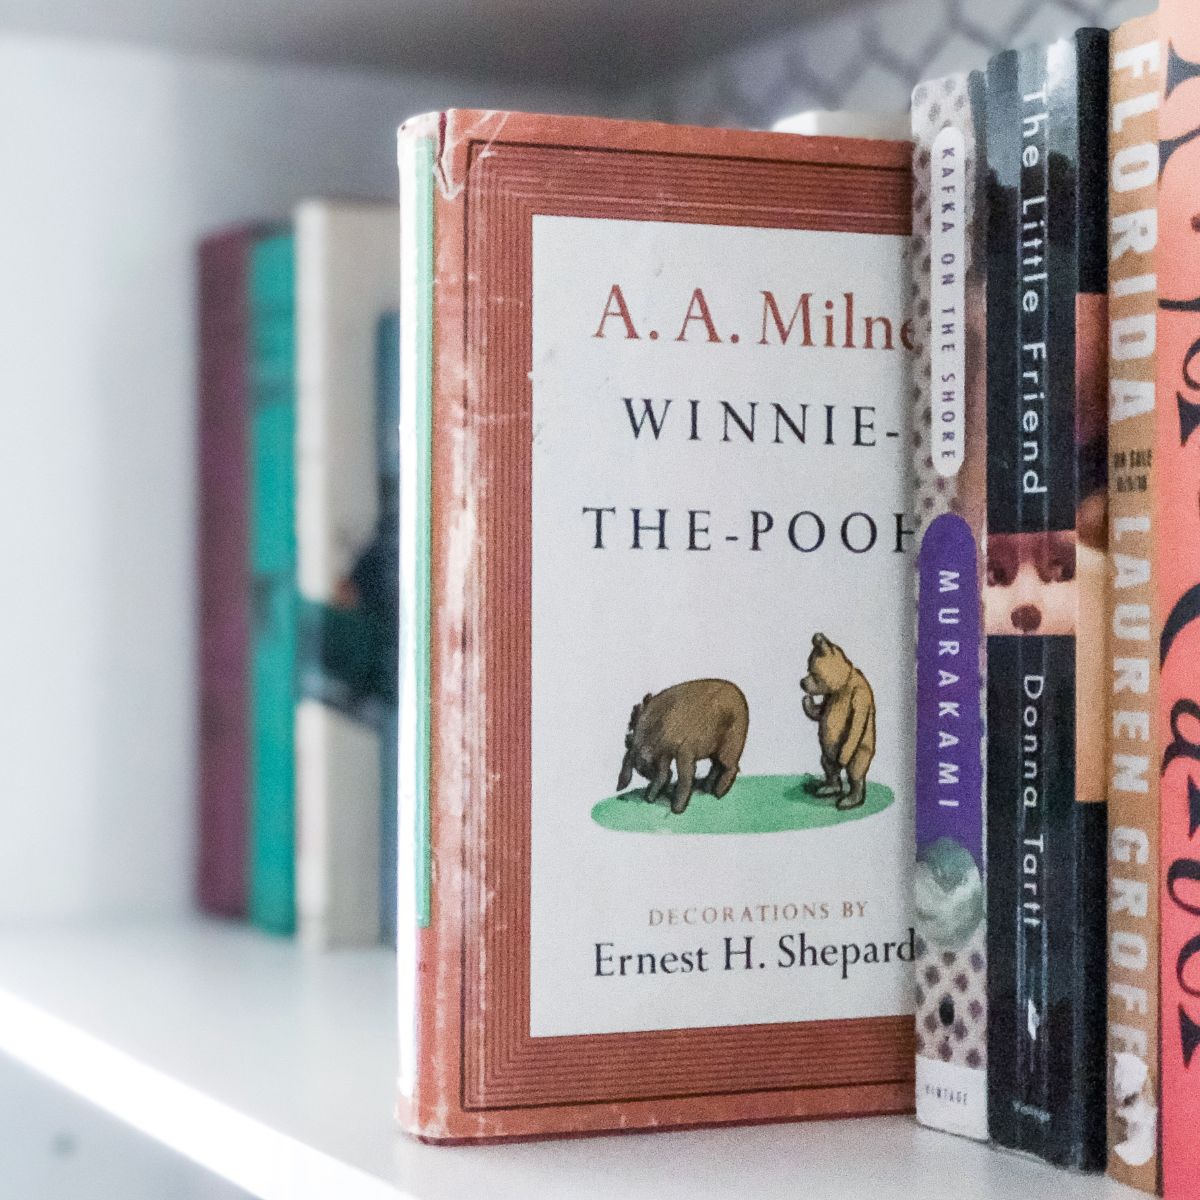 gently used vintage book (Winnie the Pooh by A.A. Milne) on a white bookshelf